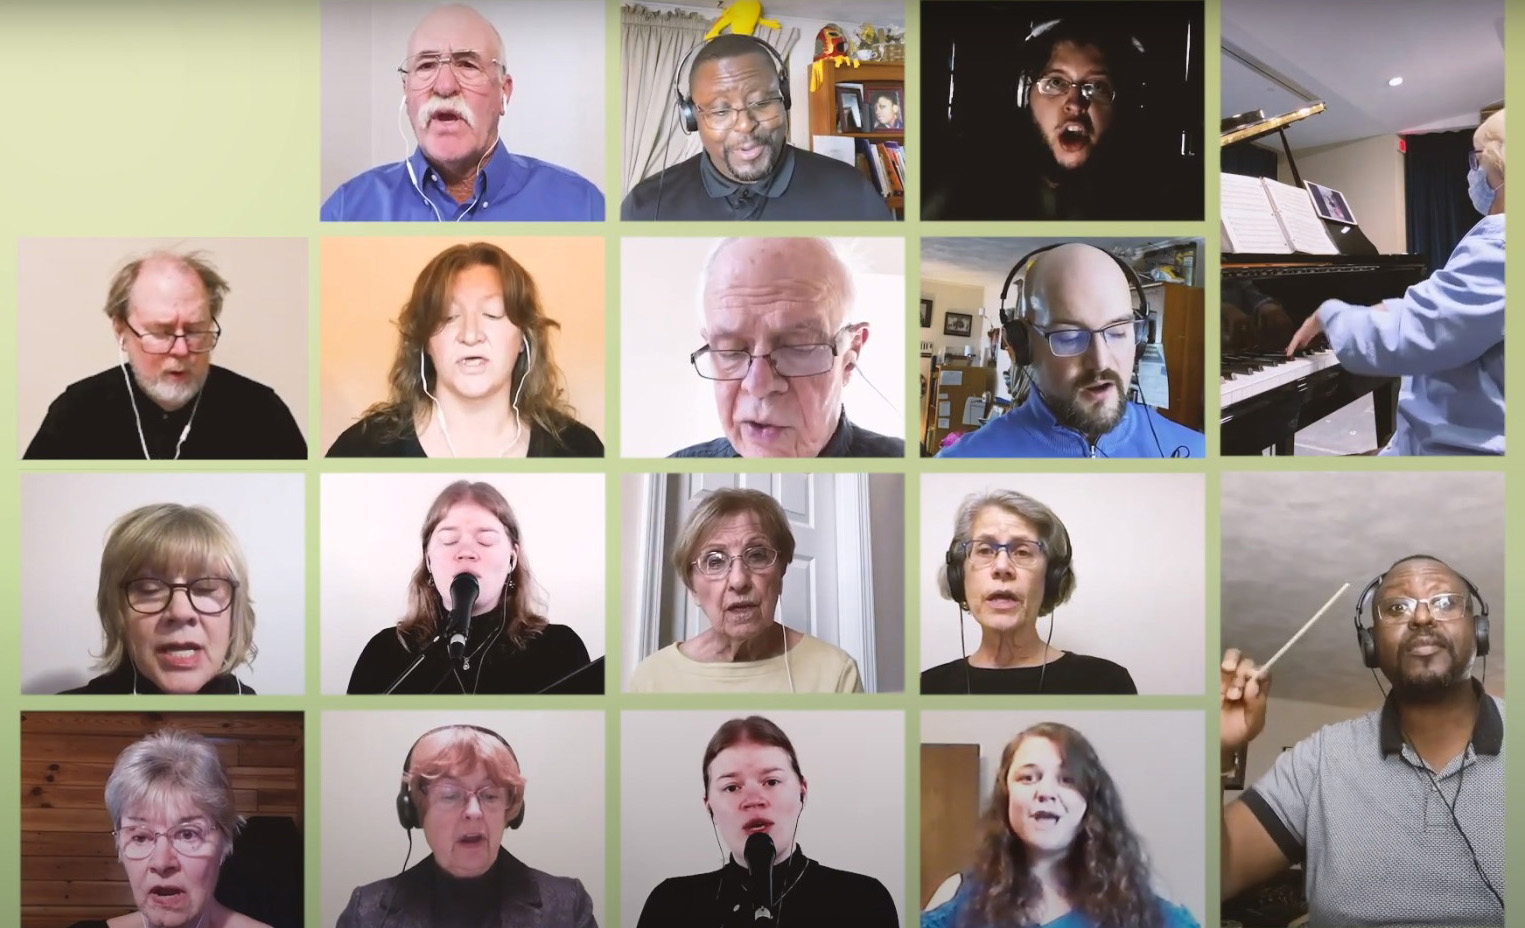 A screenshot from the choir video showing several choir members singing in a grid layout.